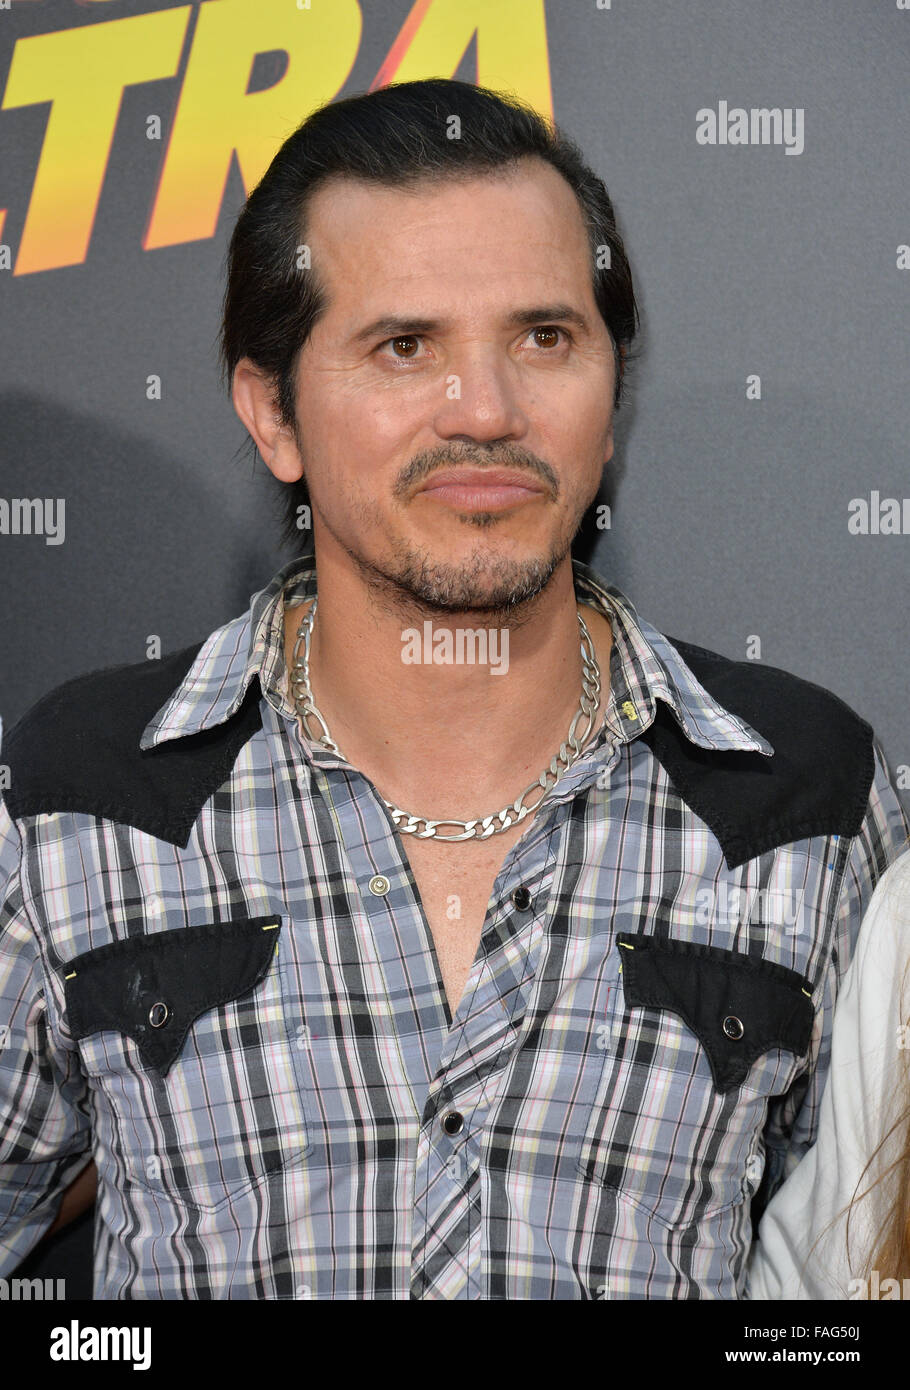 LOS ANGELES, CA - AUGUST 18, 2015: John Leguizamo at the world premiere of his movie 'American Ultra' at The Ace Hotel Downtown. Stock Photo